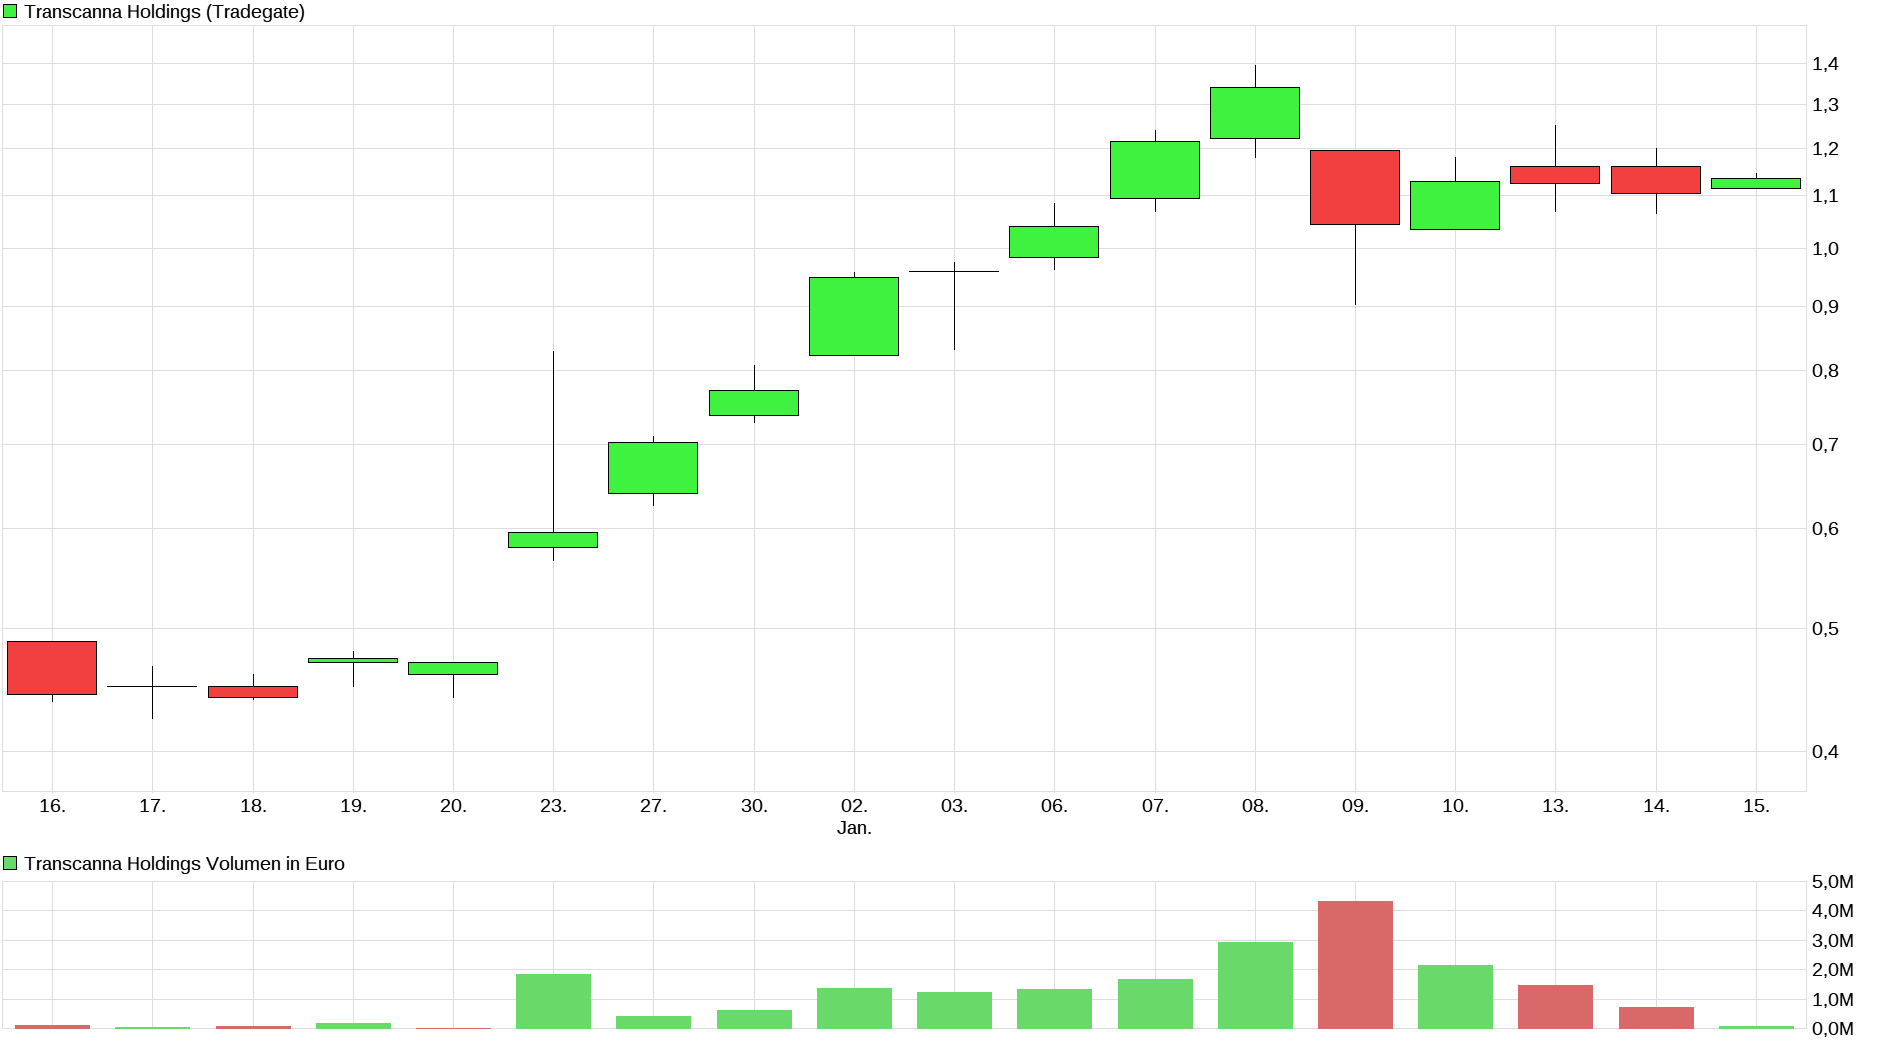 chart_month_transcannaholdings.png